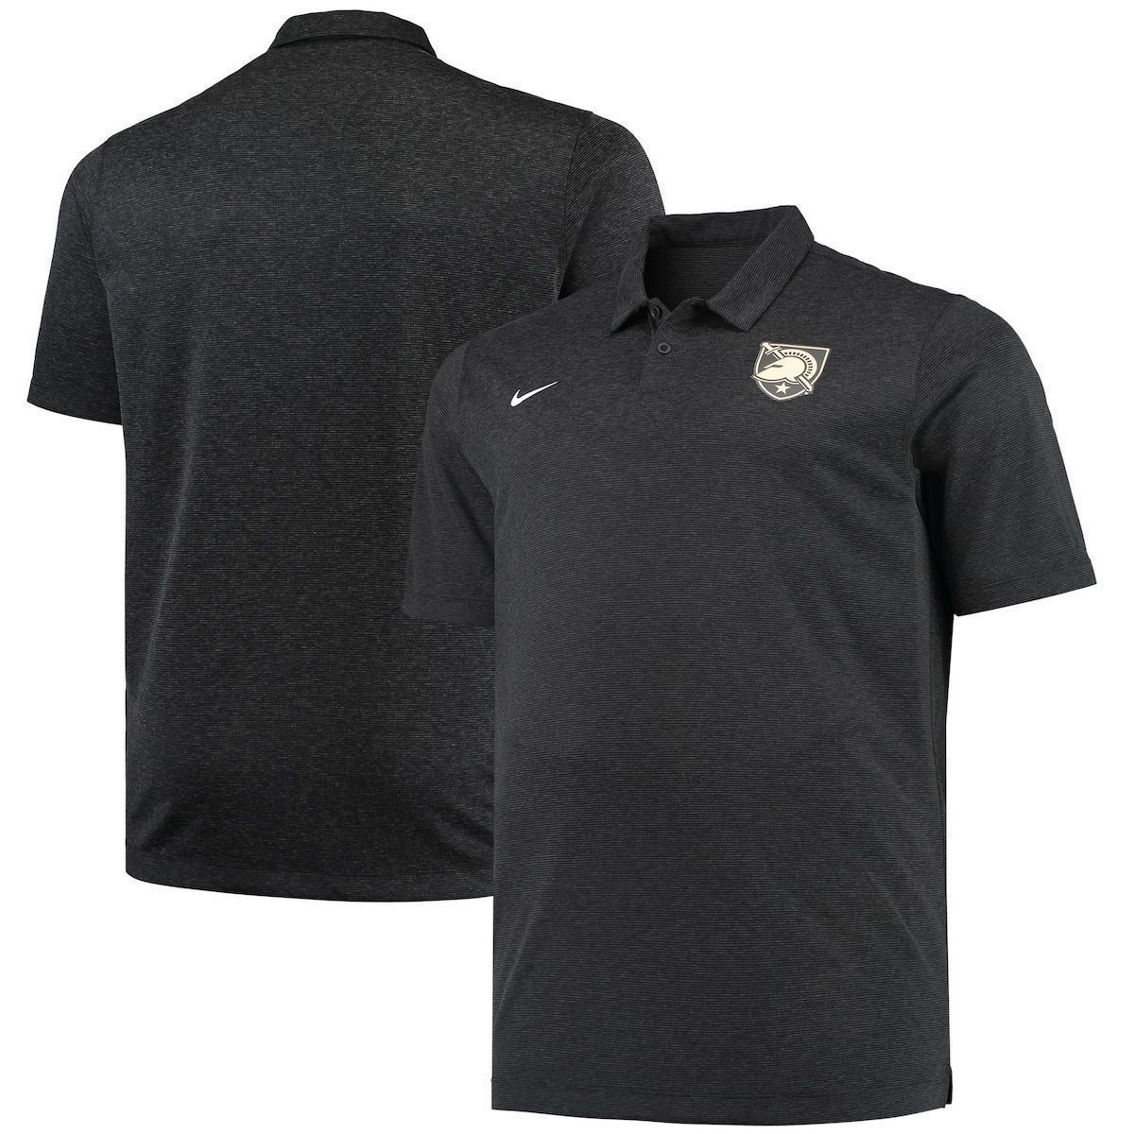 Nike Men's Heathered Black Army Black Knights Big & Tall Performance Polo - Image 2 of 4